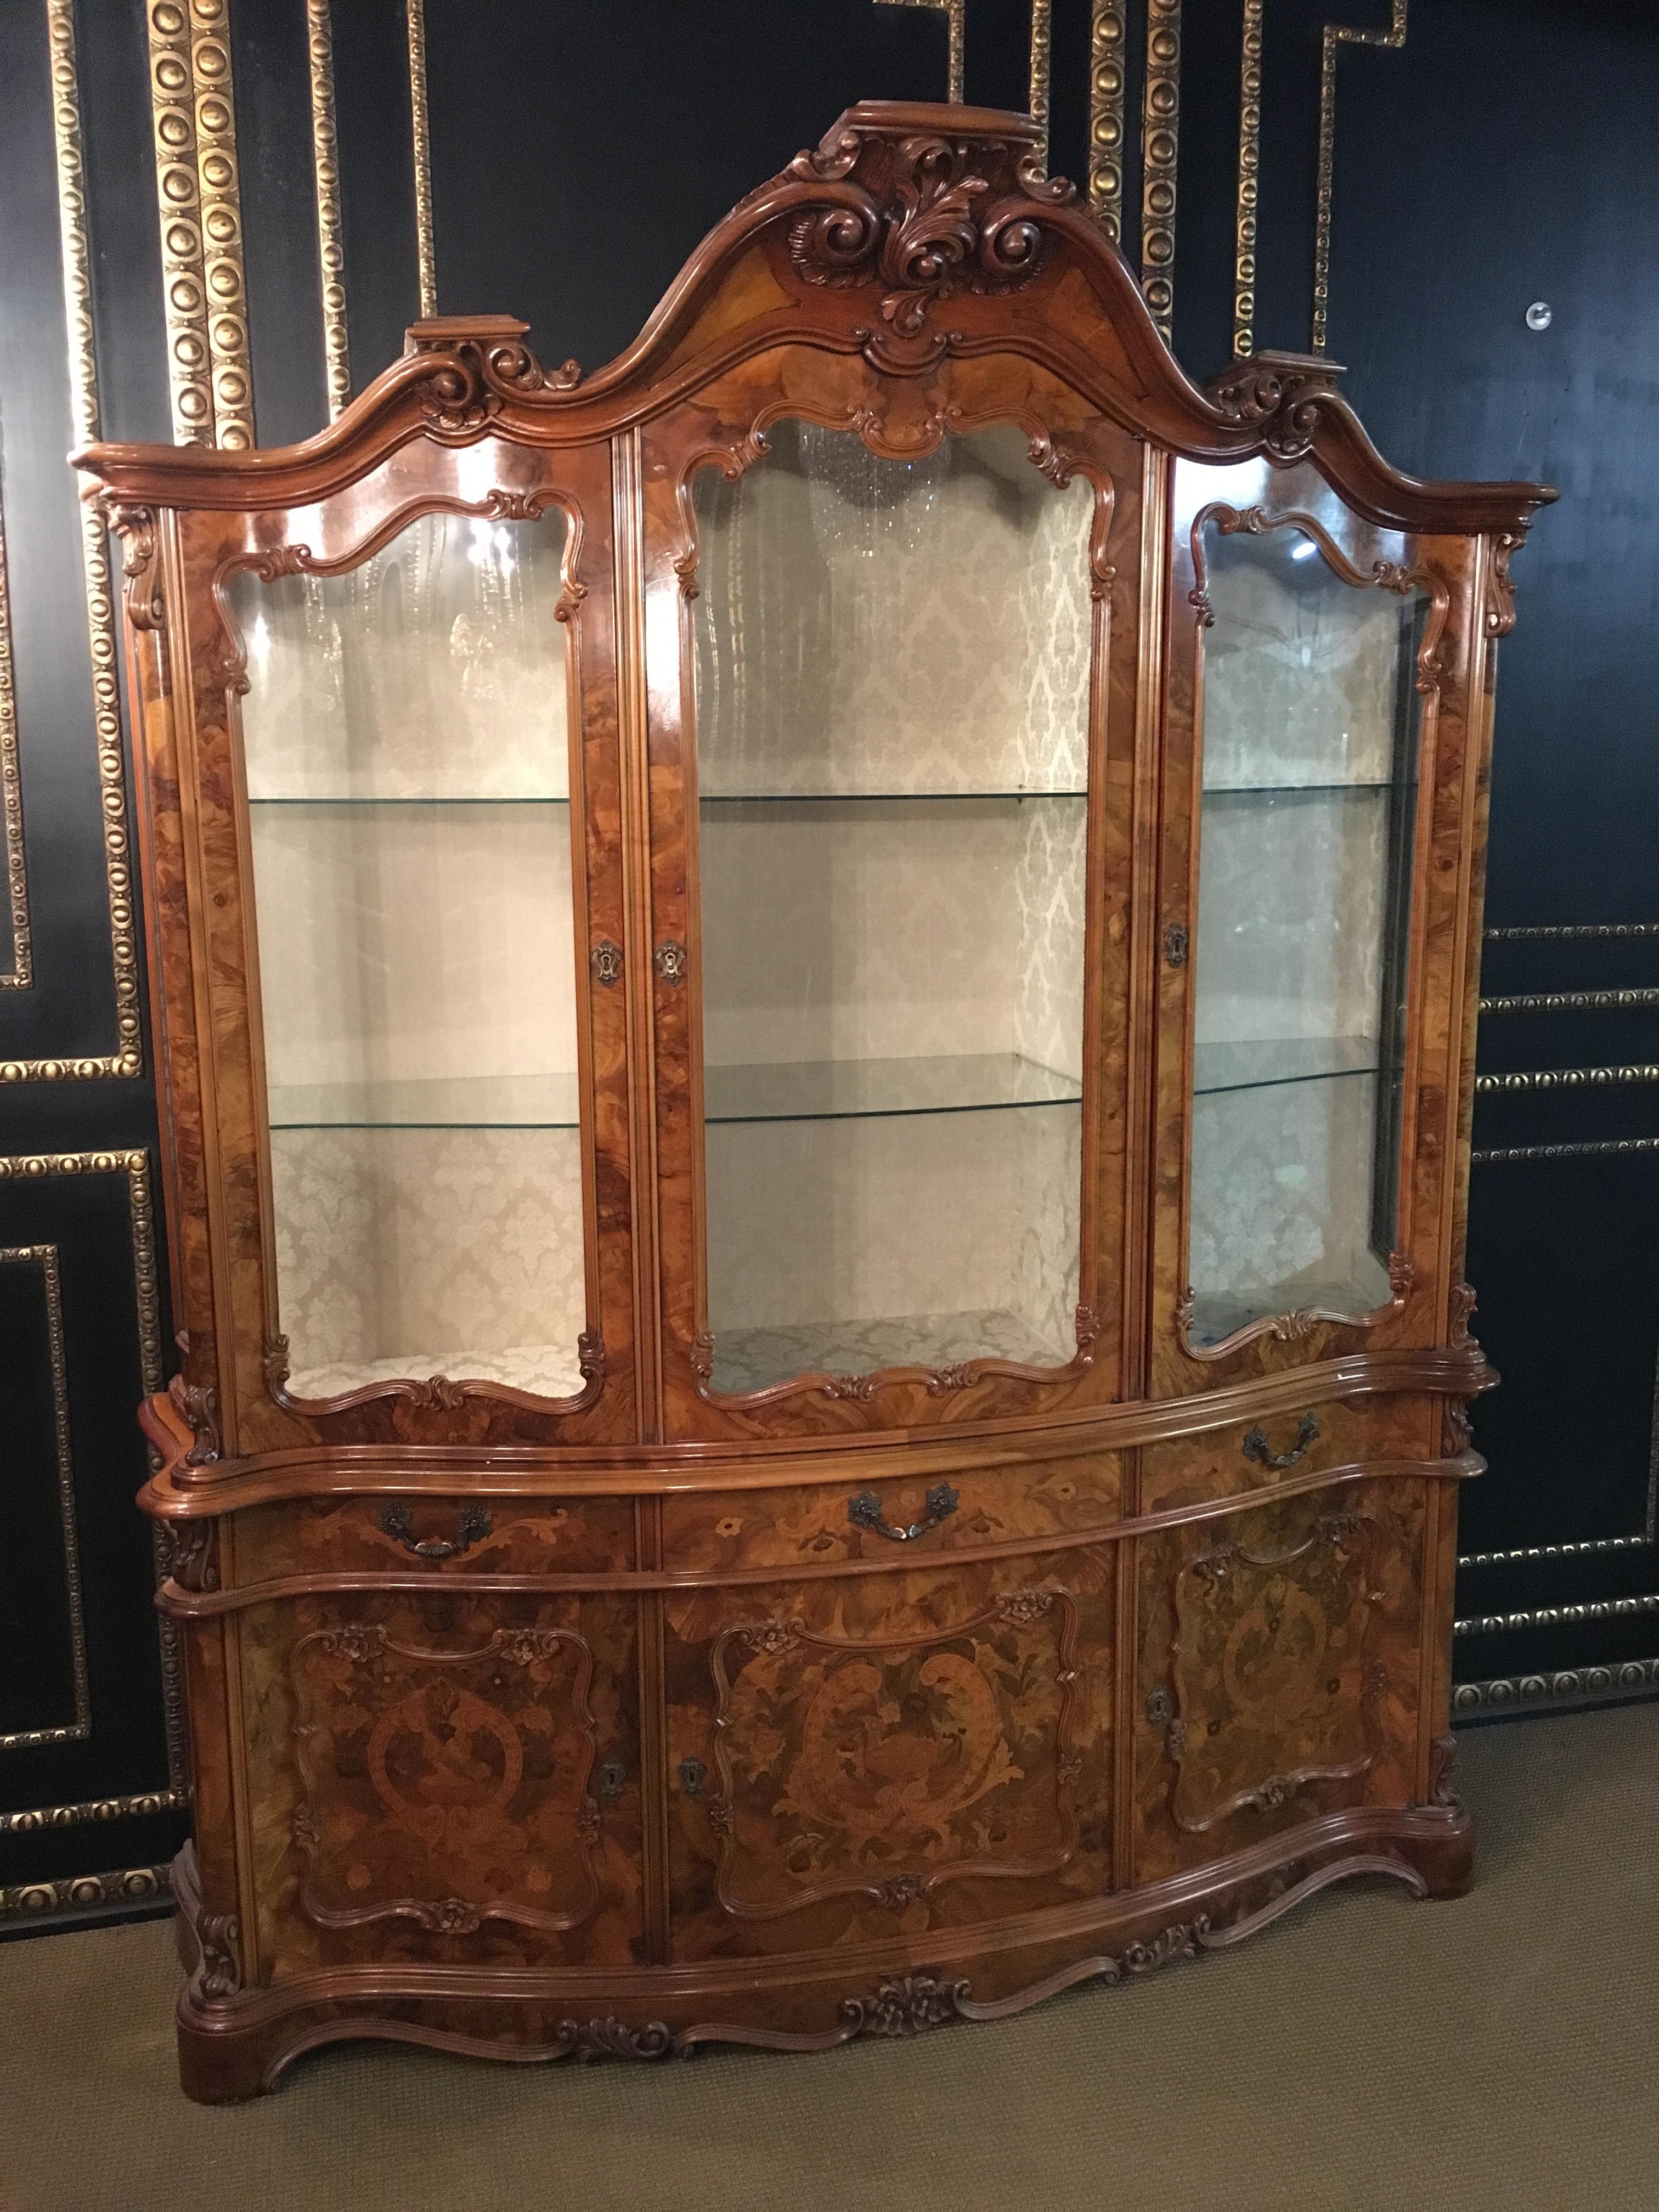 Unique cabinet in the style of the 18th century, in root wood with floral inlays, in absolutely 